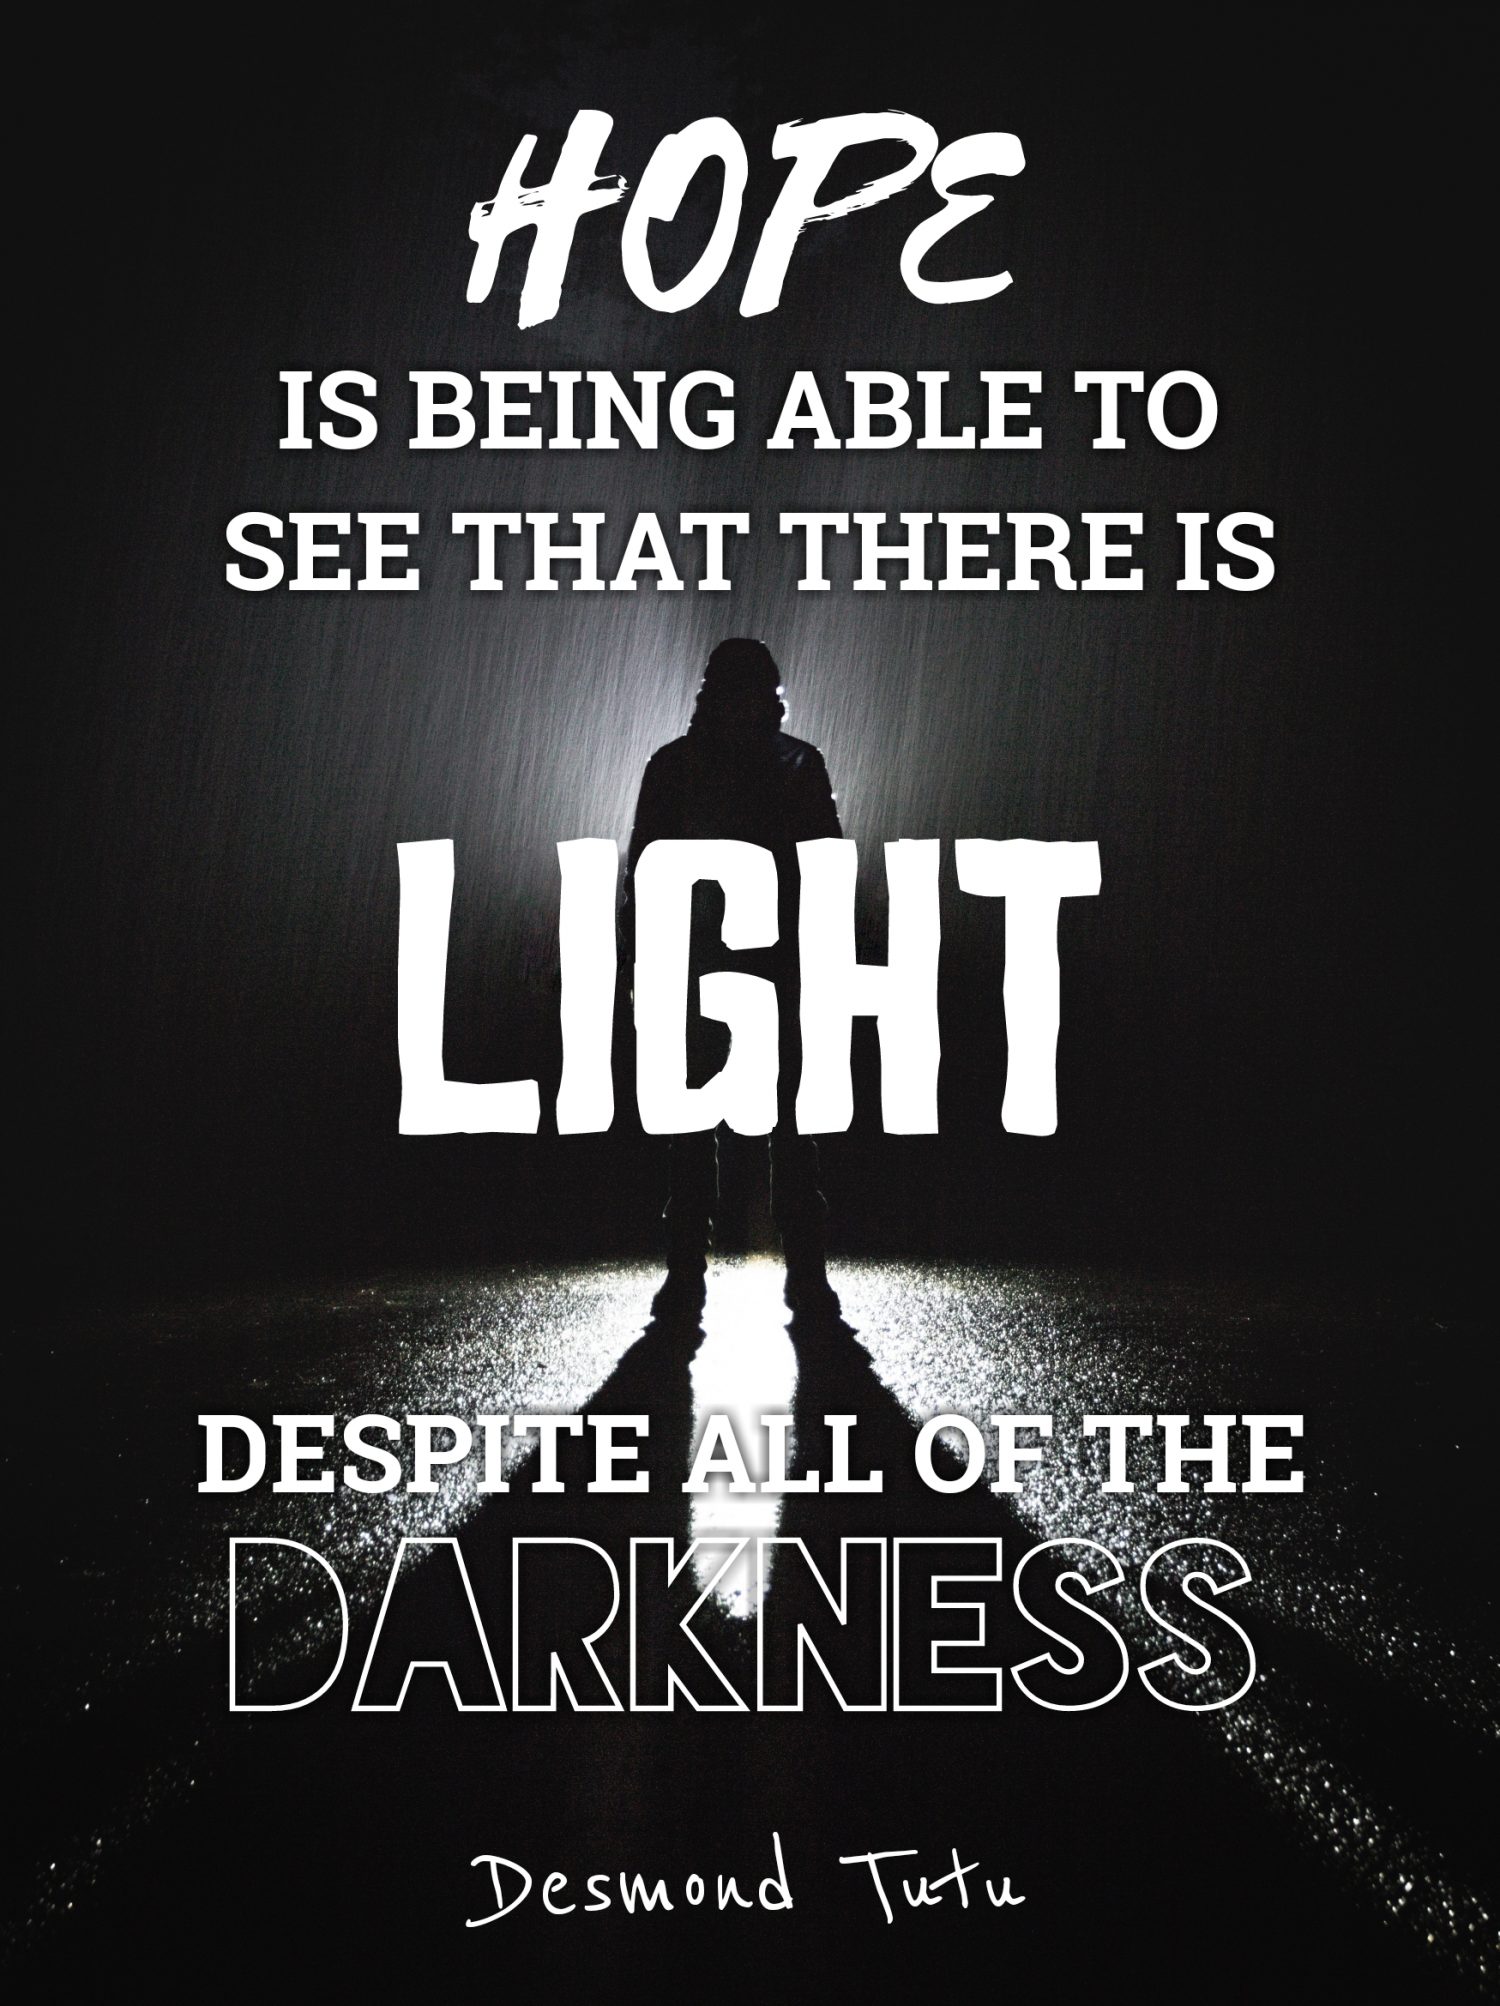 Hope is being to see that there is light despite all of the darkness. (Desmond Tutu)